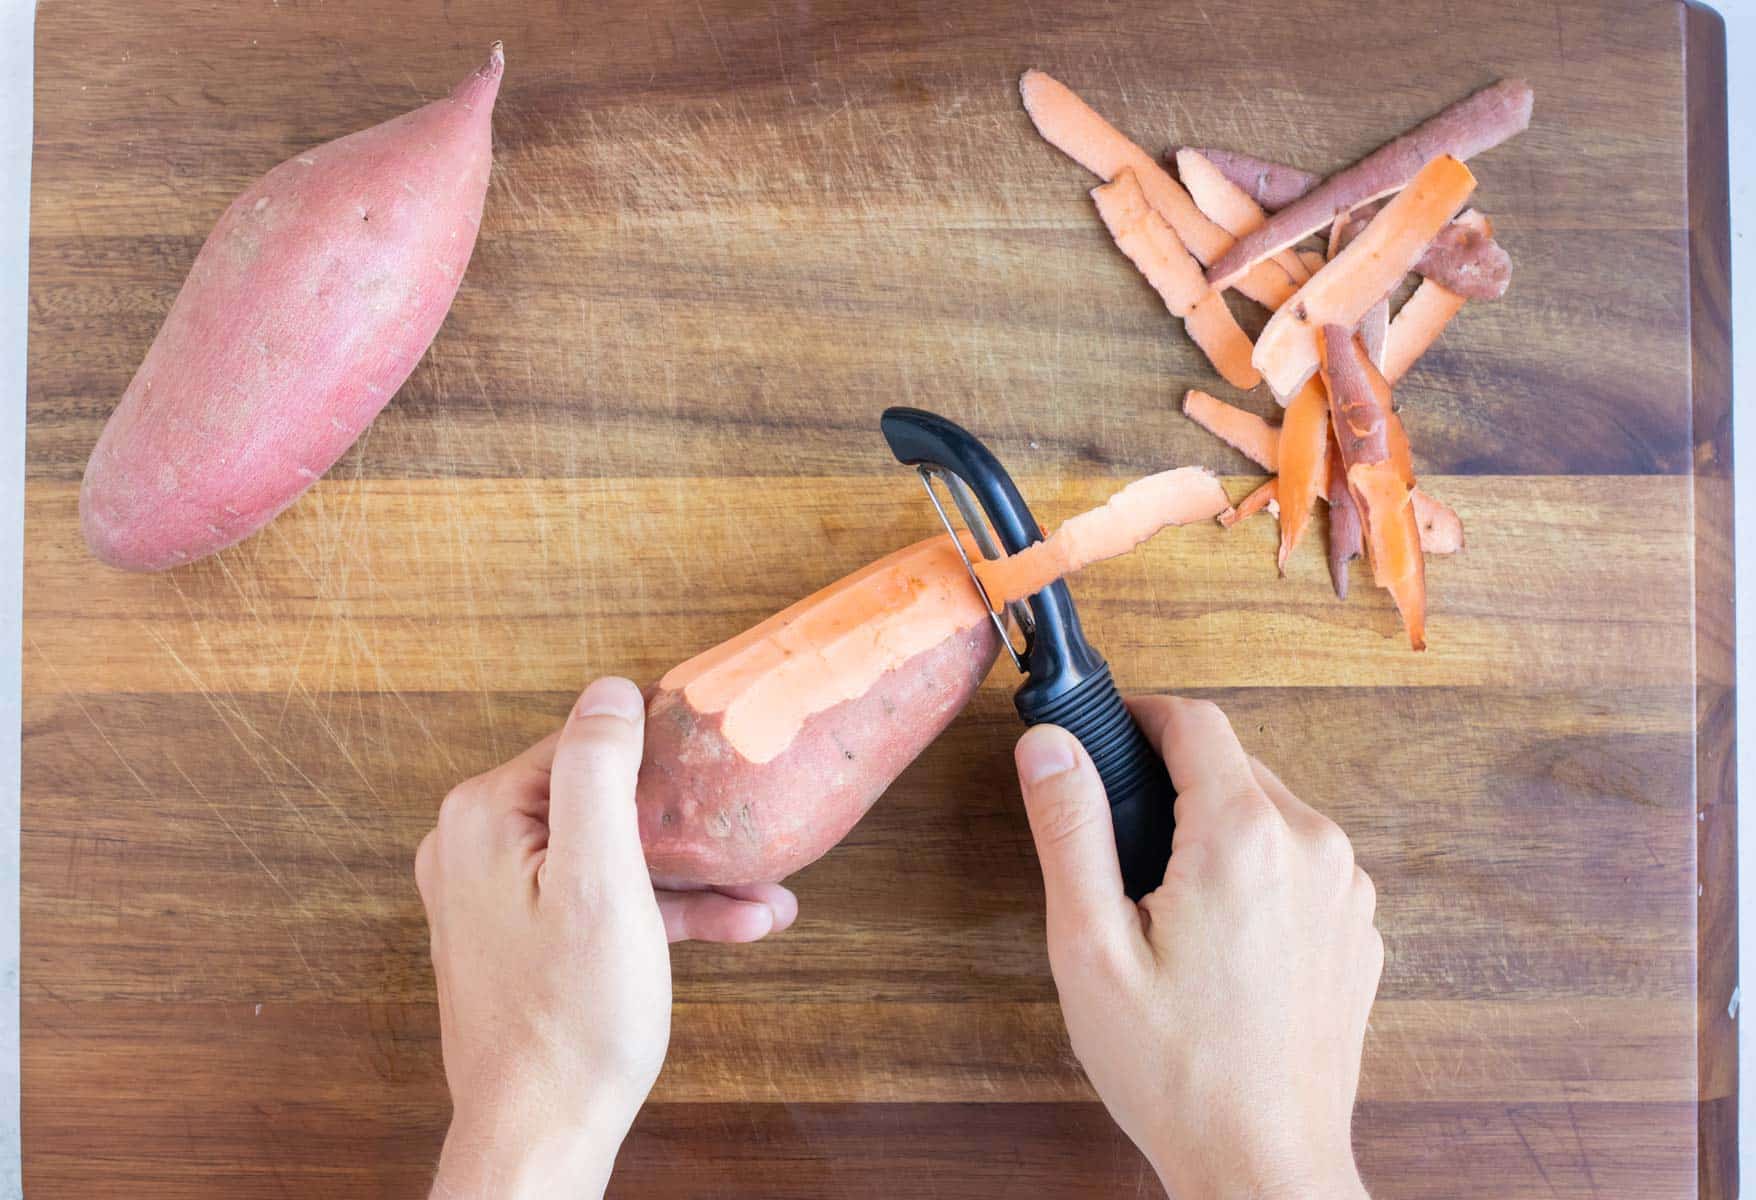 Sweet potatoes are peeled before chopping for the vegetarian enchilada filling.